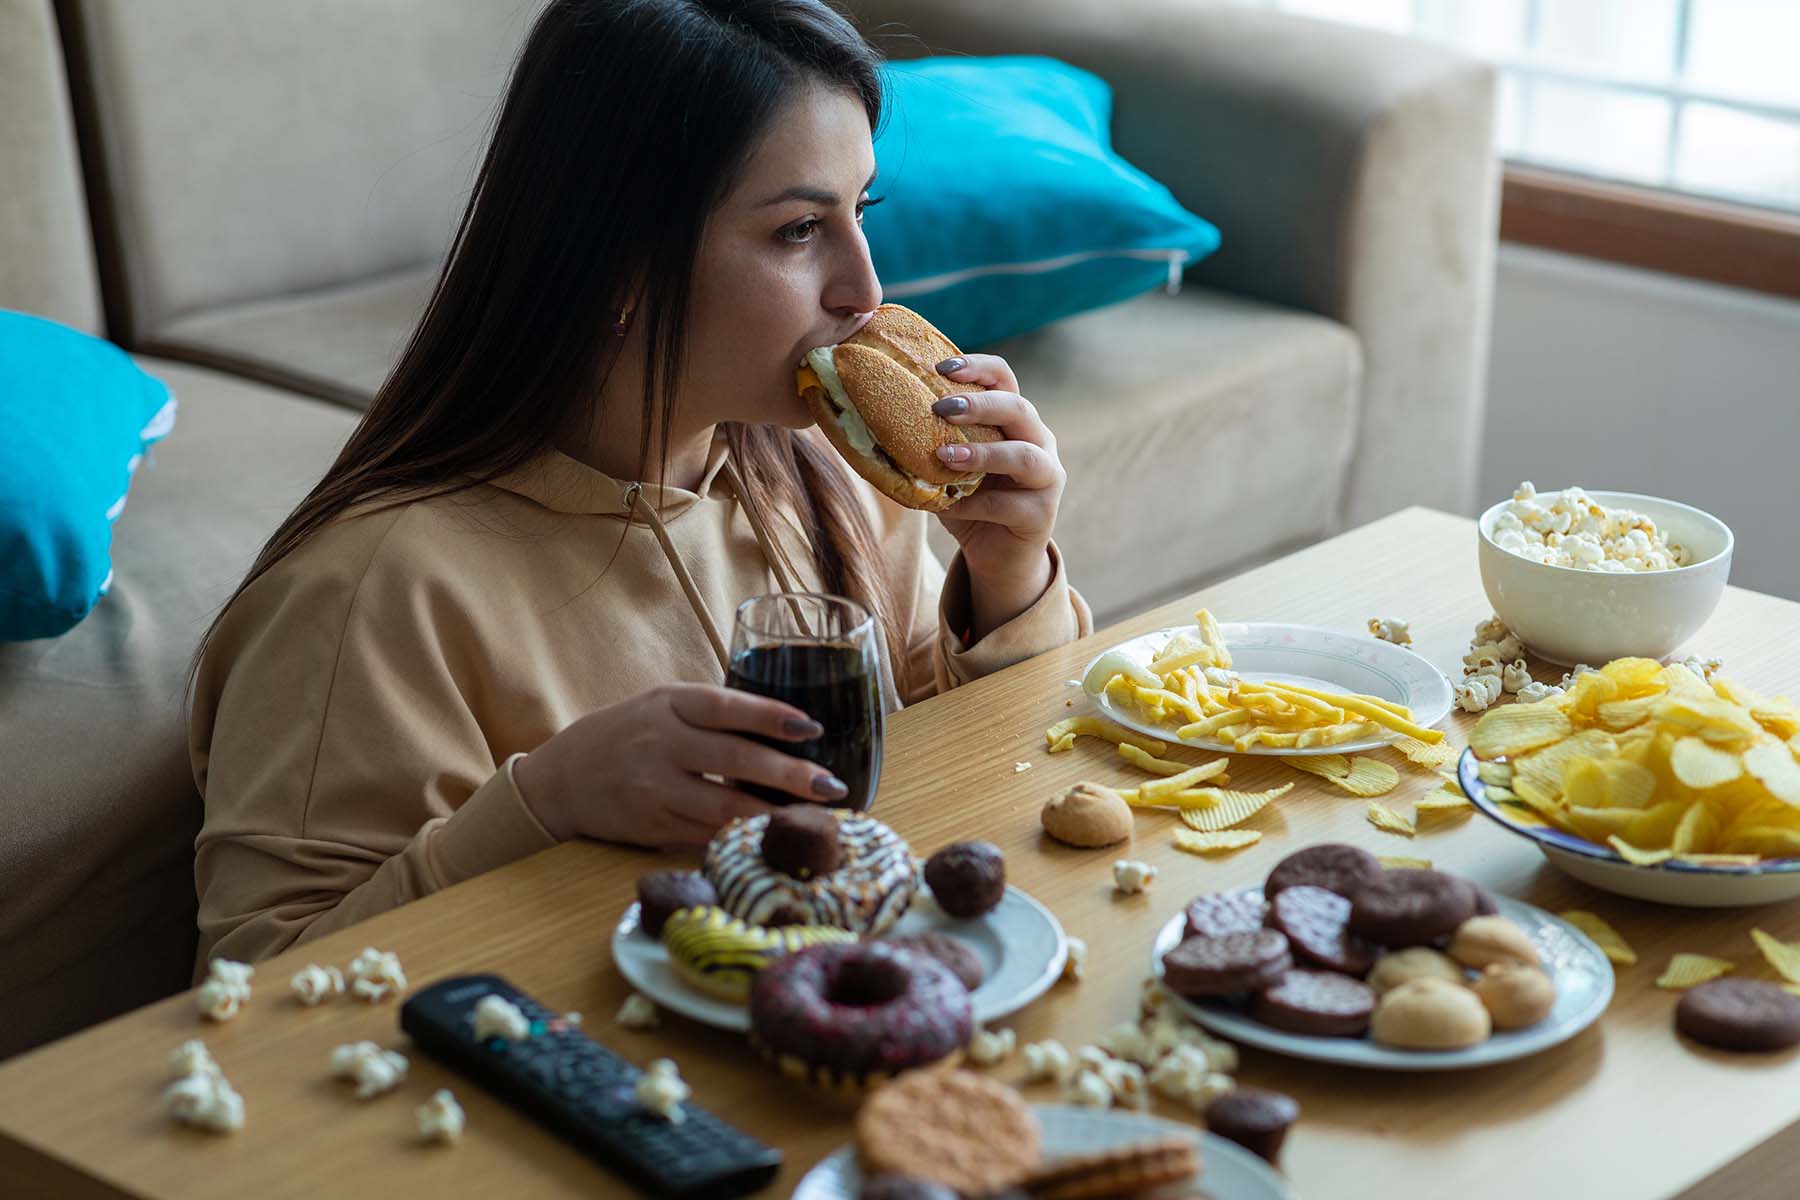 Woman sits in front of a table full of junk food, obviously over eating.